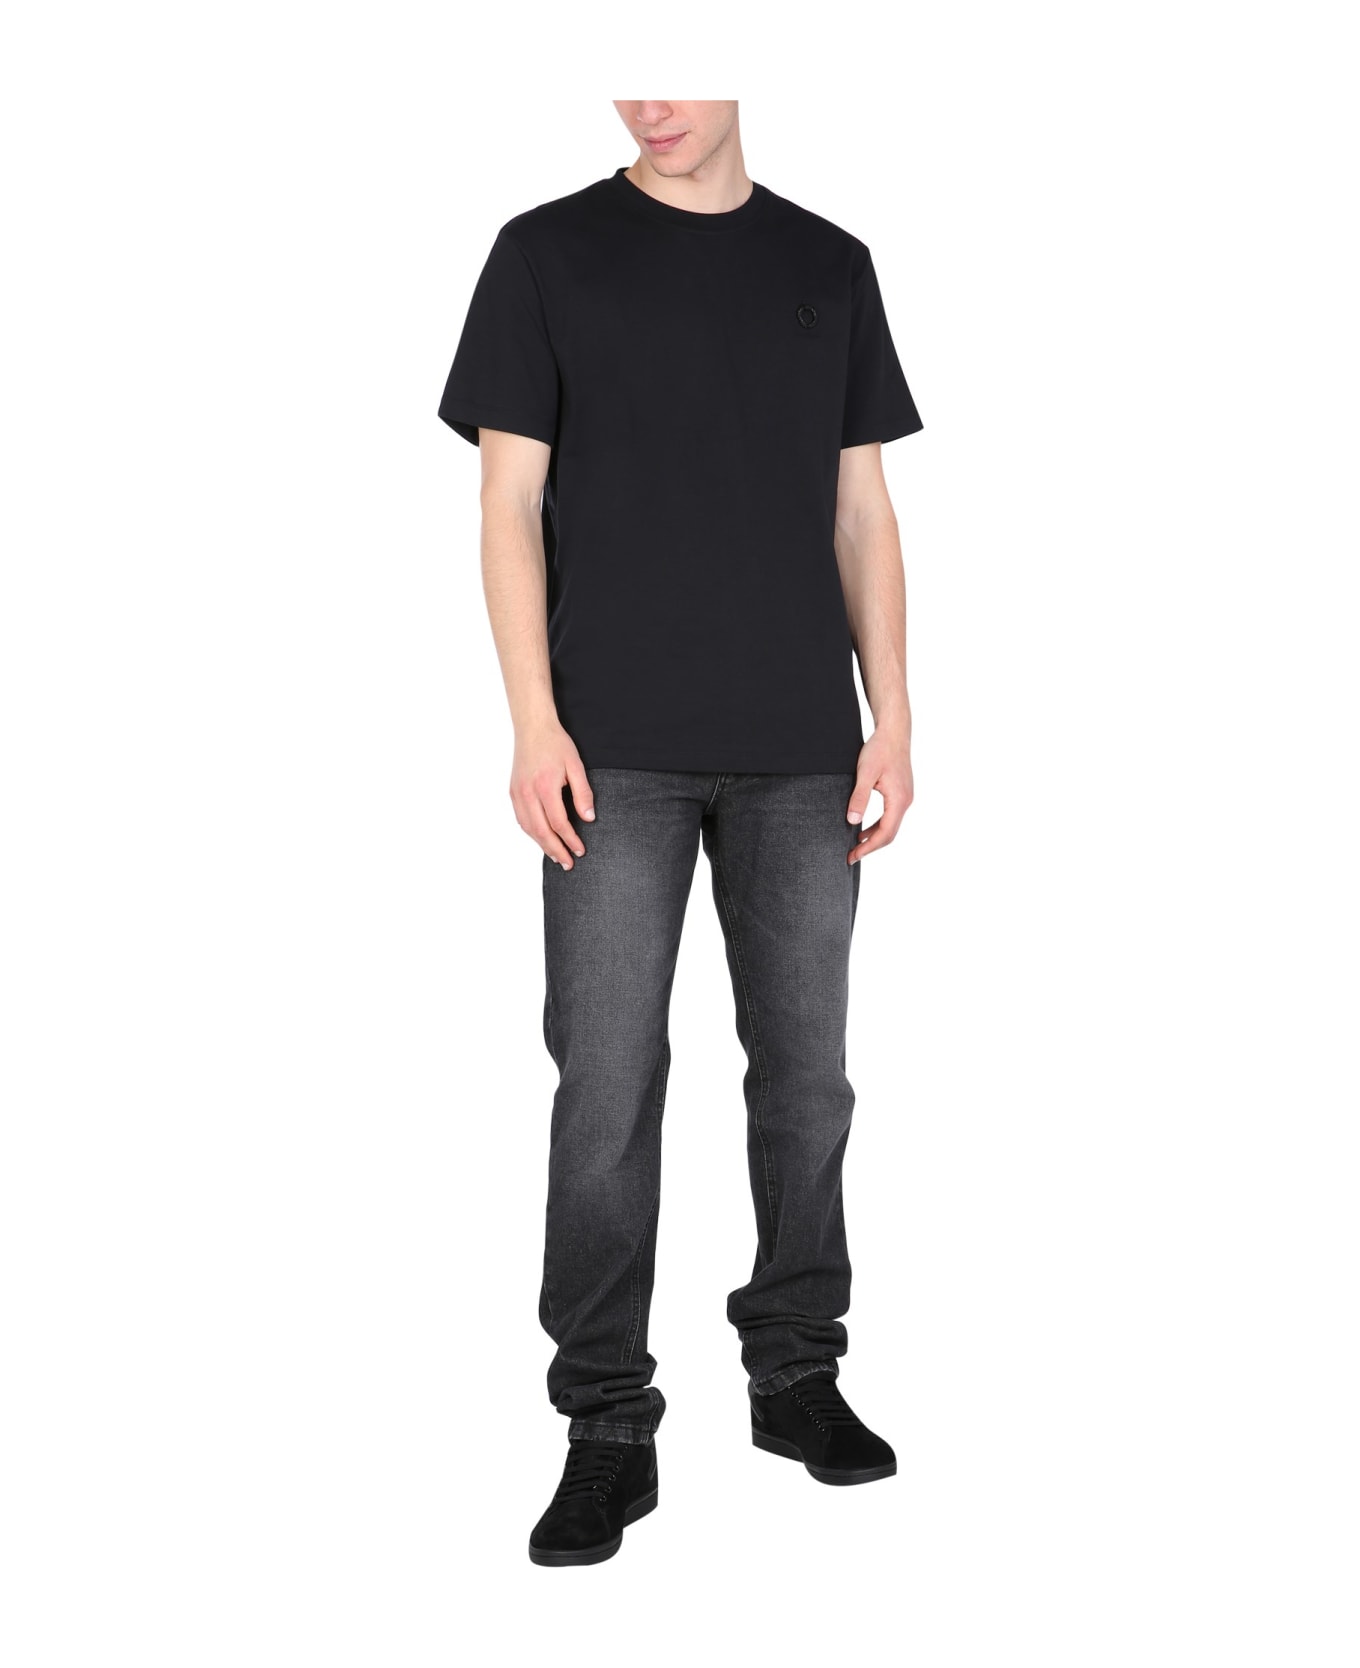 Fred Perry by Raf Simons Crew Neck T-shirt - NERO